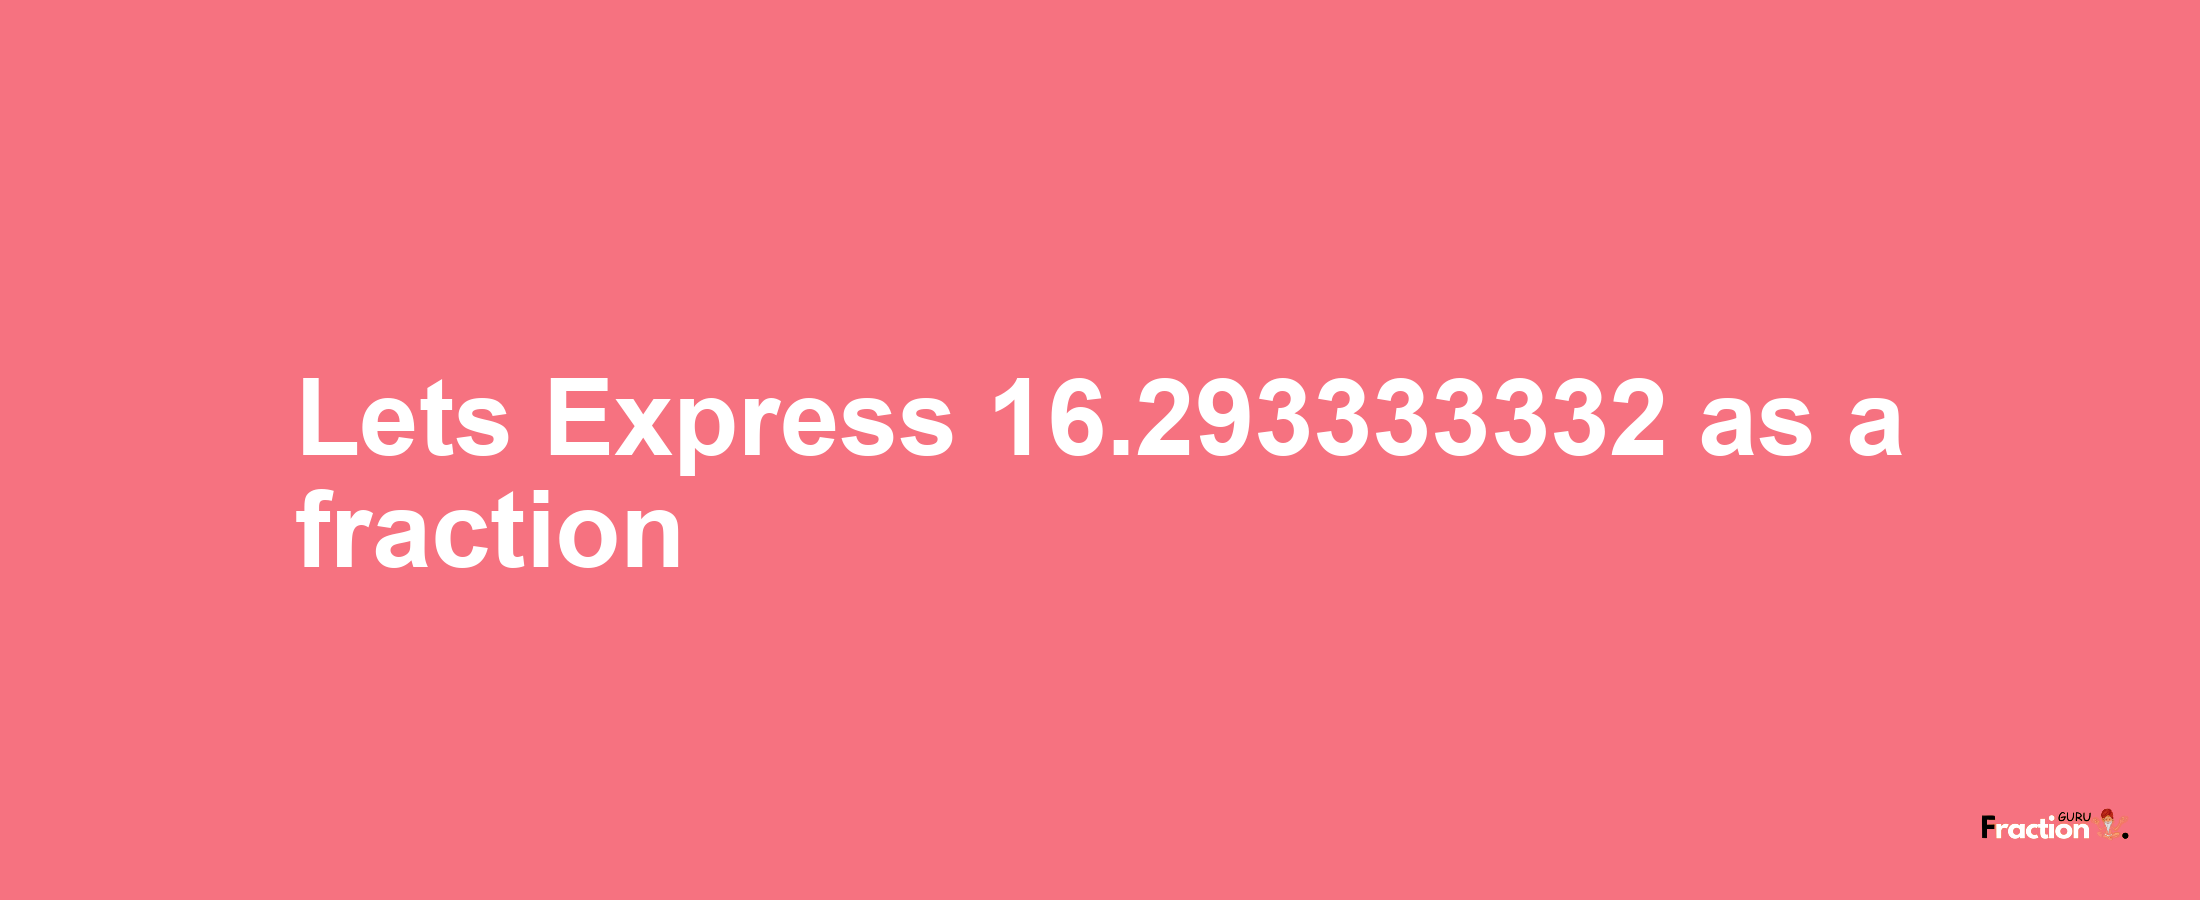 Lets Express 16.293333332 as afraction